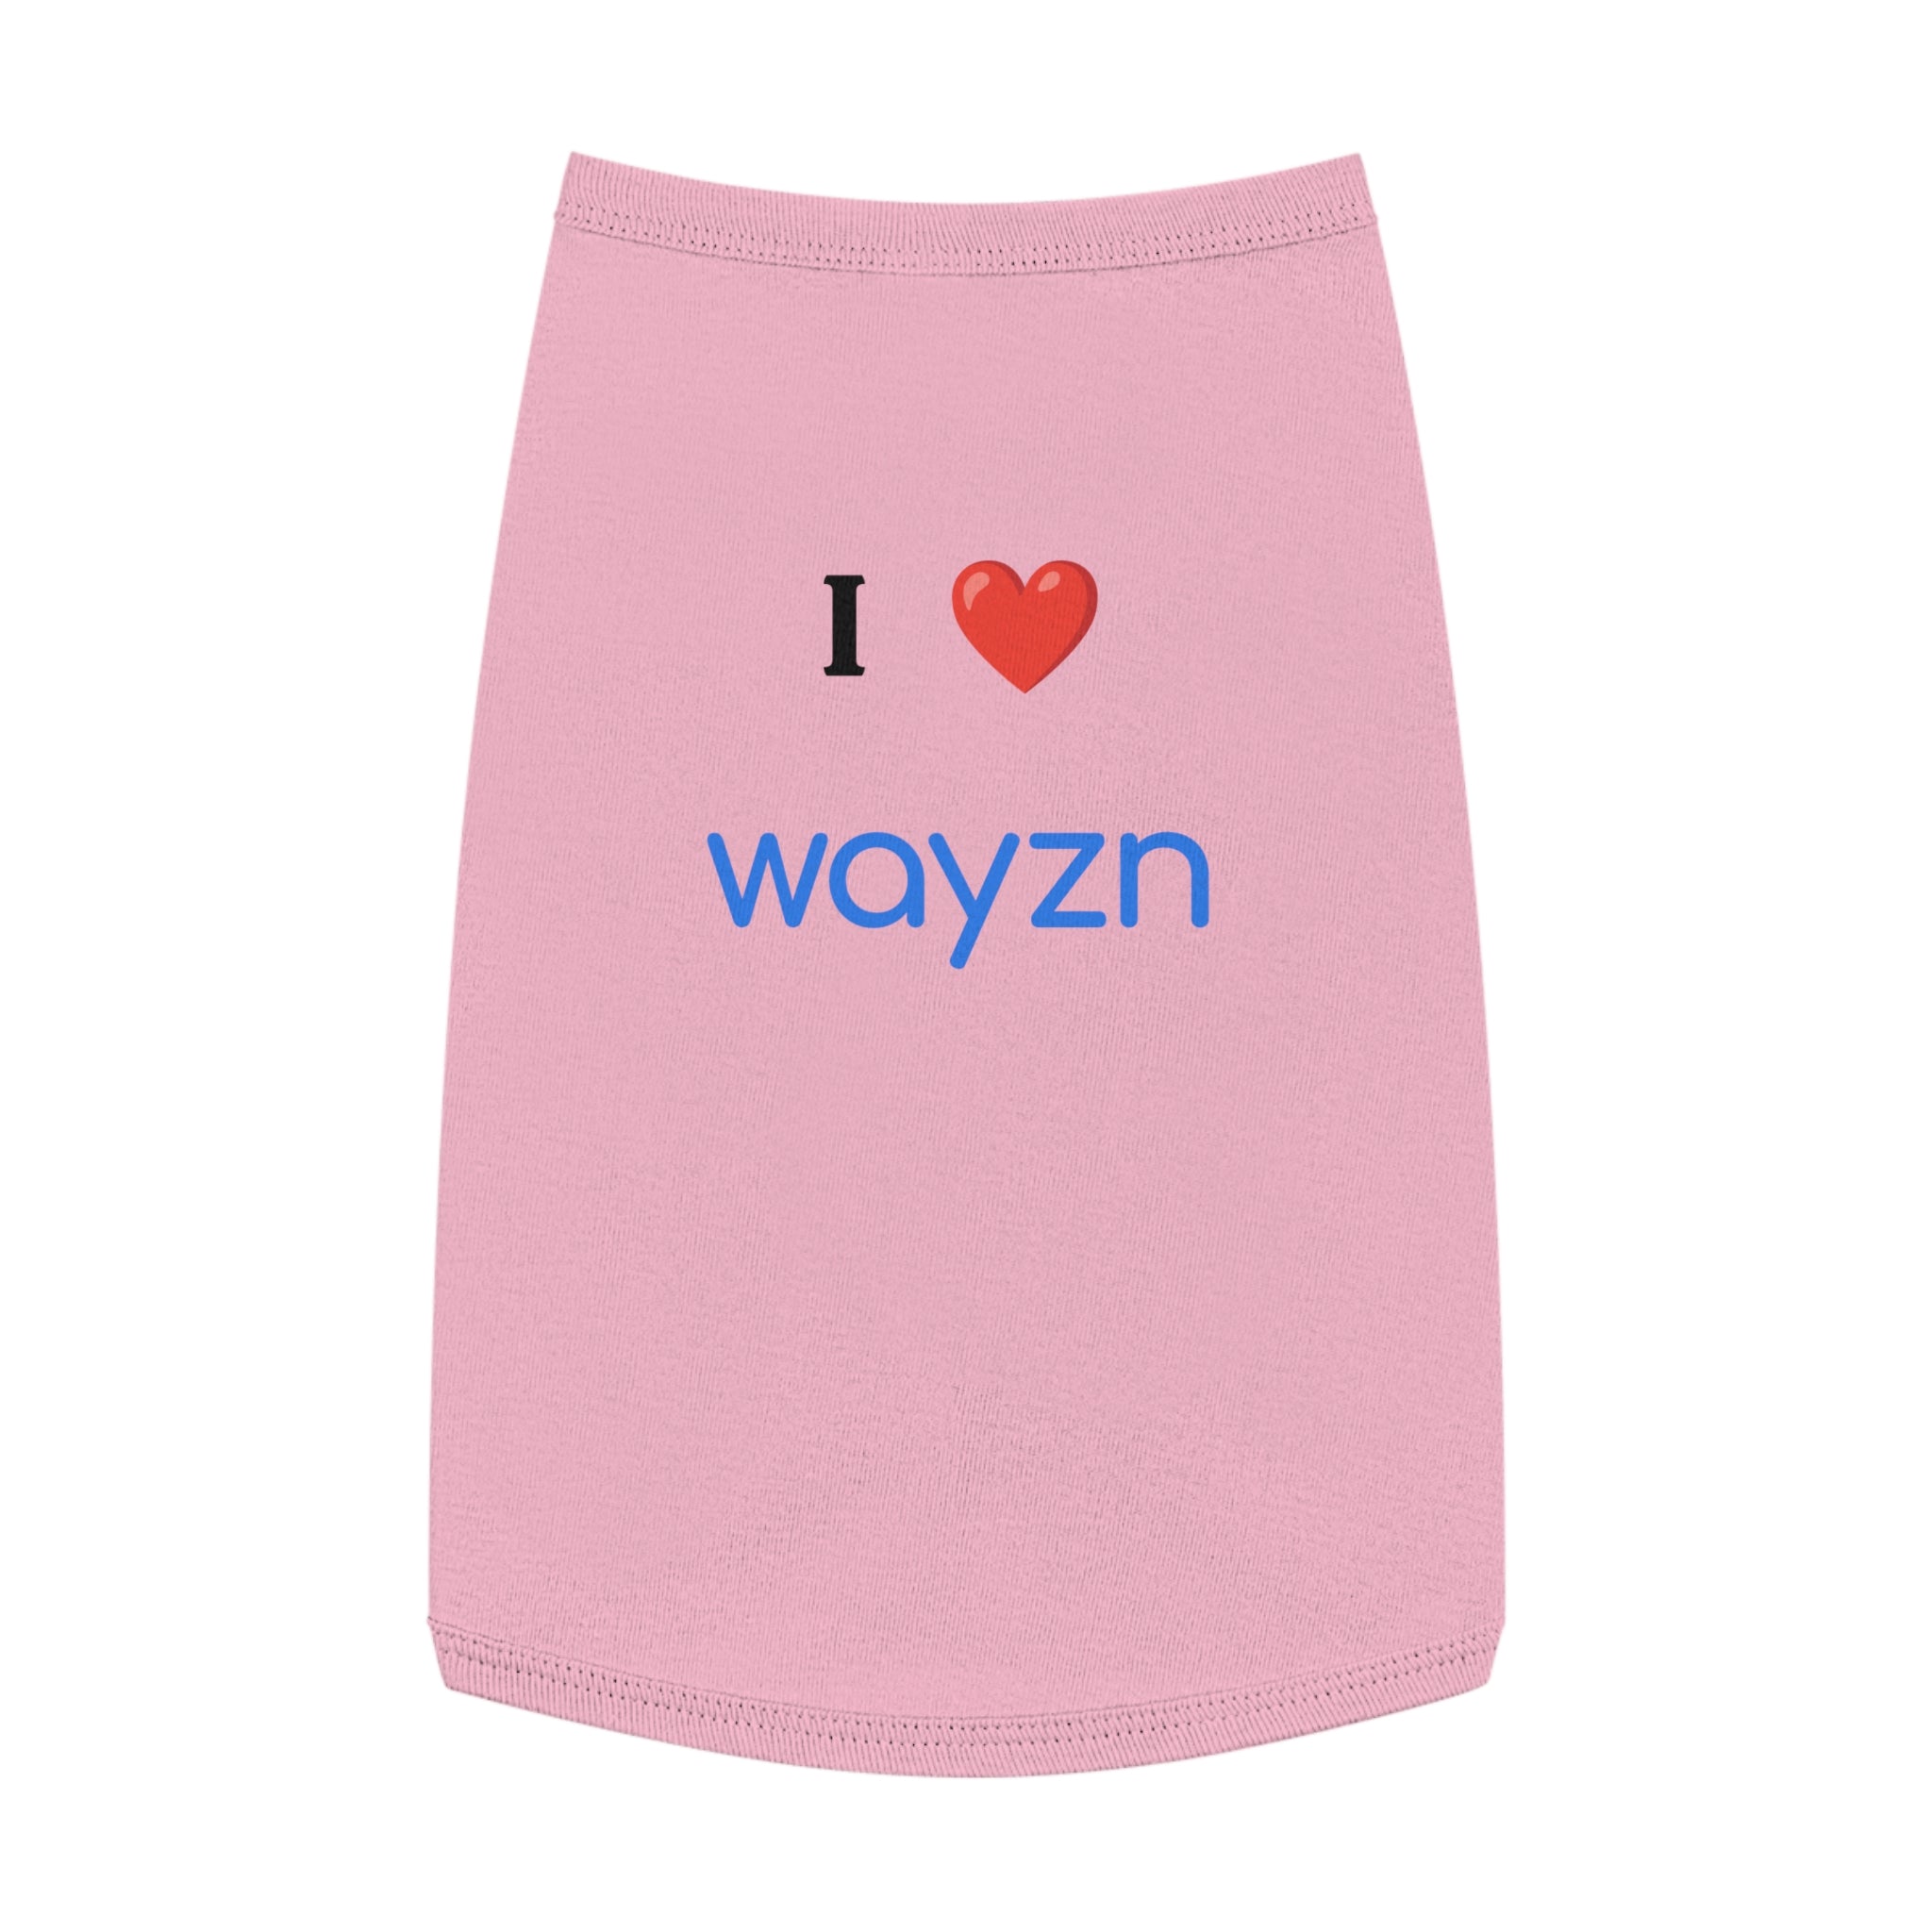 I Heart Wayzn - Dog Jersey: A pink shirt with a heart and text, perfect for your furry friend.